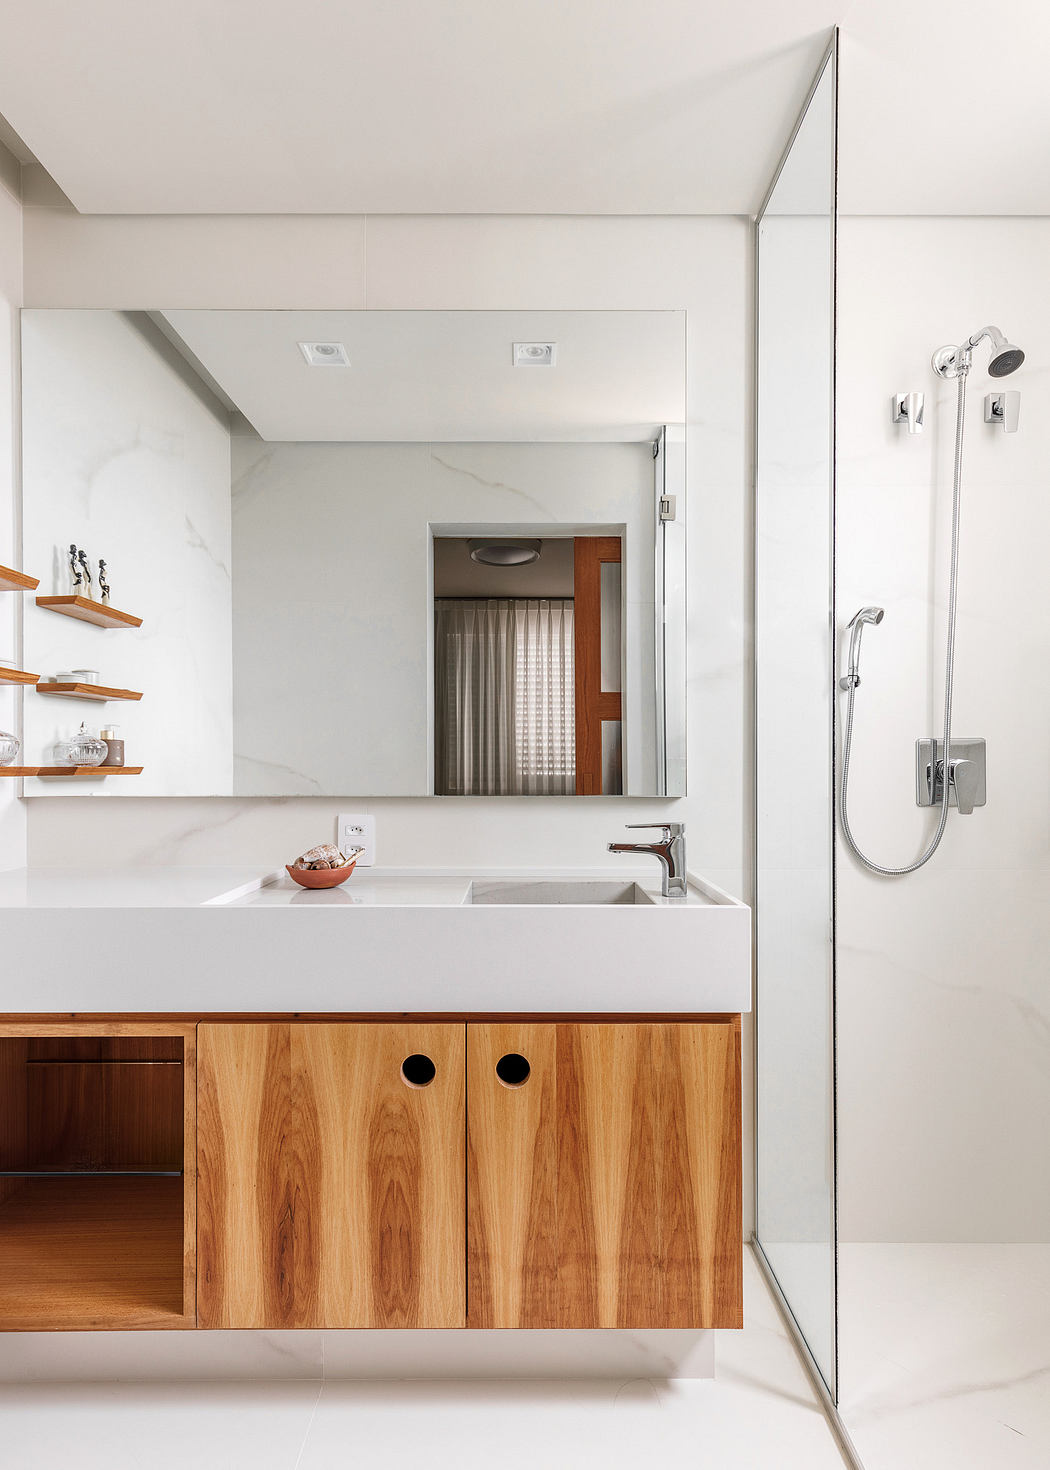 Modern bathroom with wooden vanity, white sink, and glass shower.